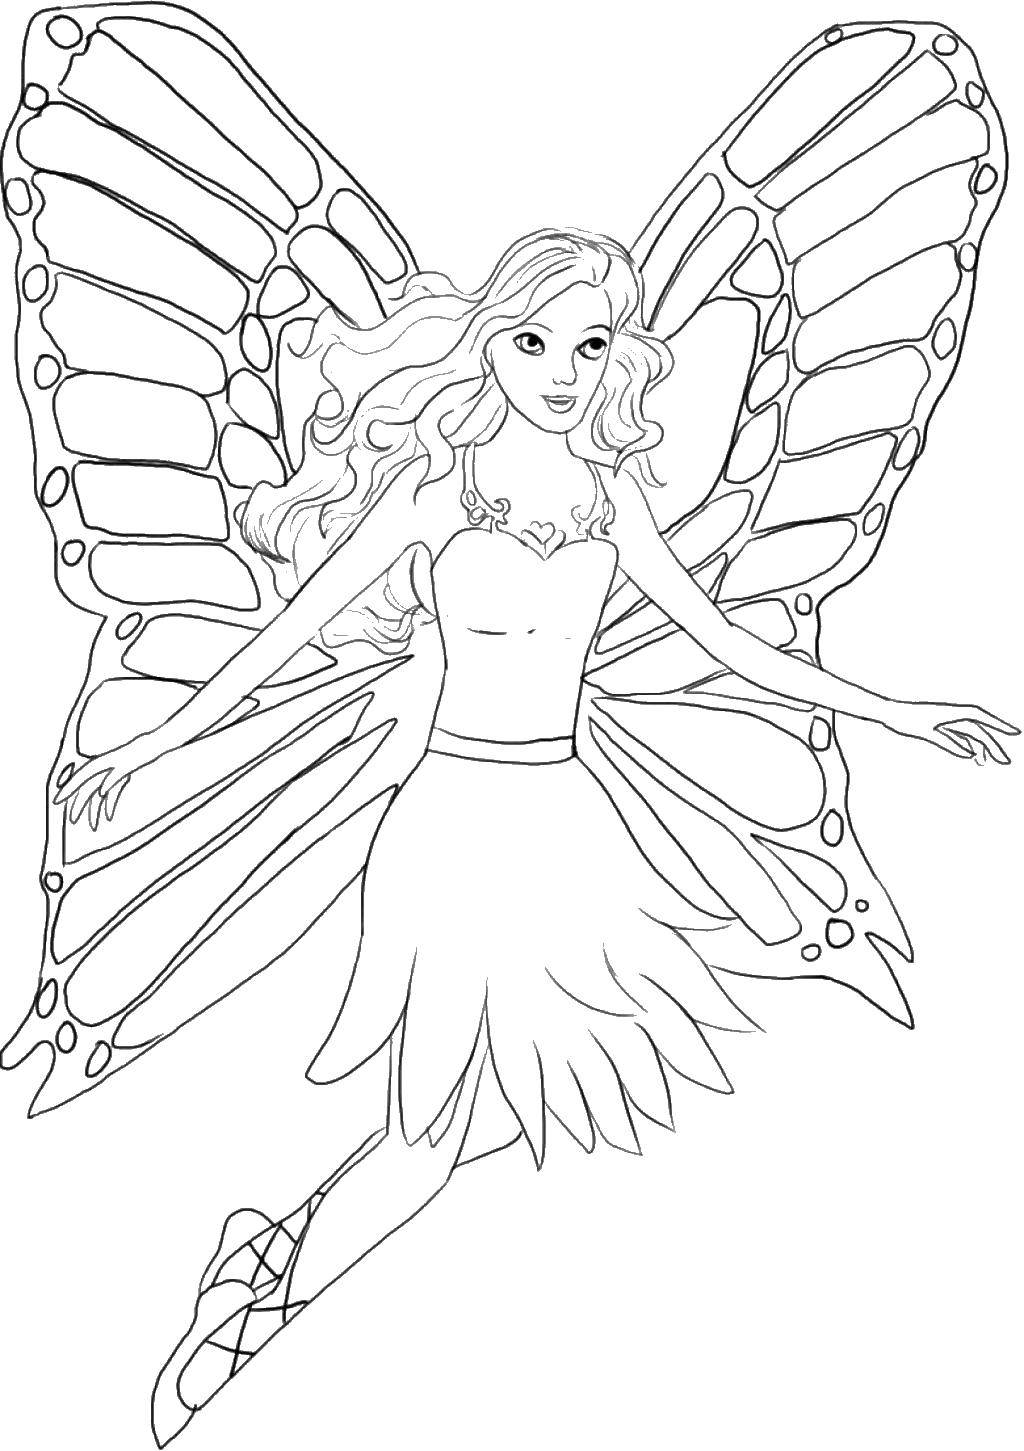 Coloring Fairy. Category Winx. Tags:  fairies, girls, girls, wings.